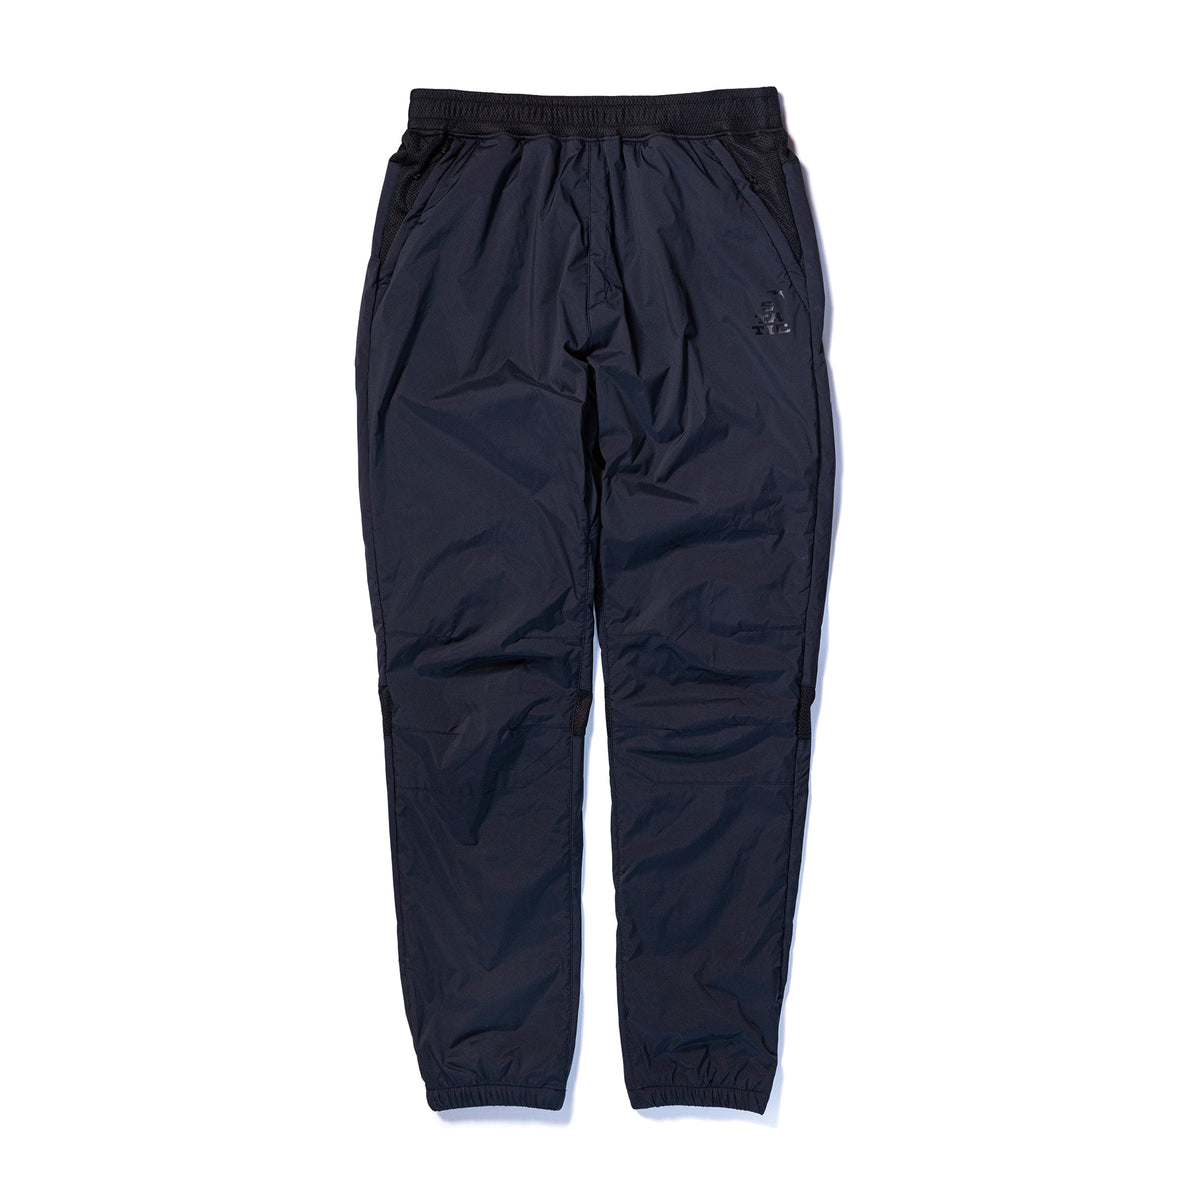 ADRIFT PANTS WITH SHELL